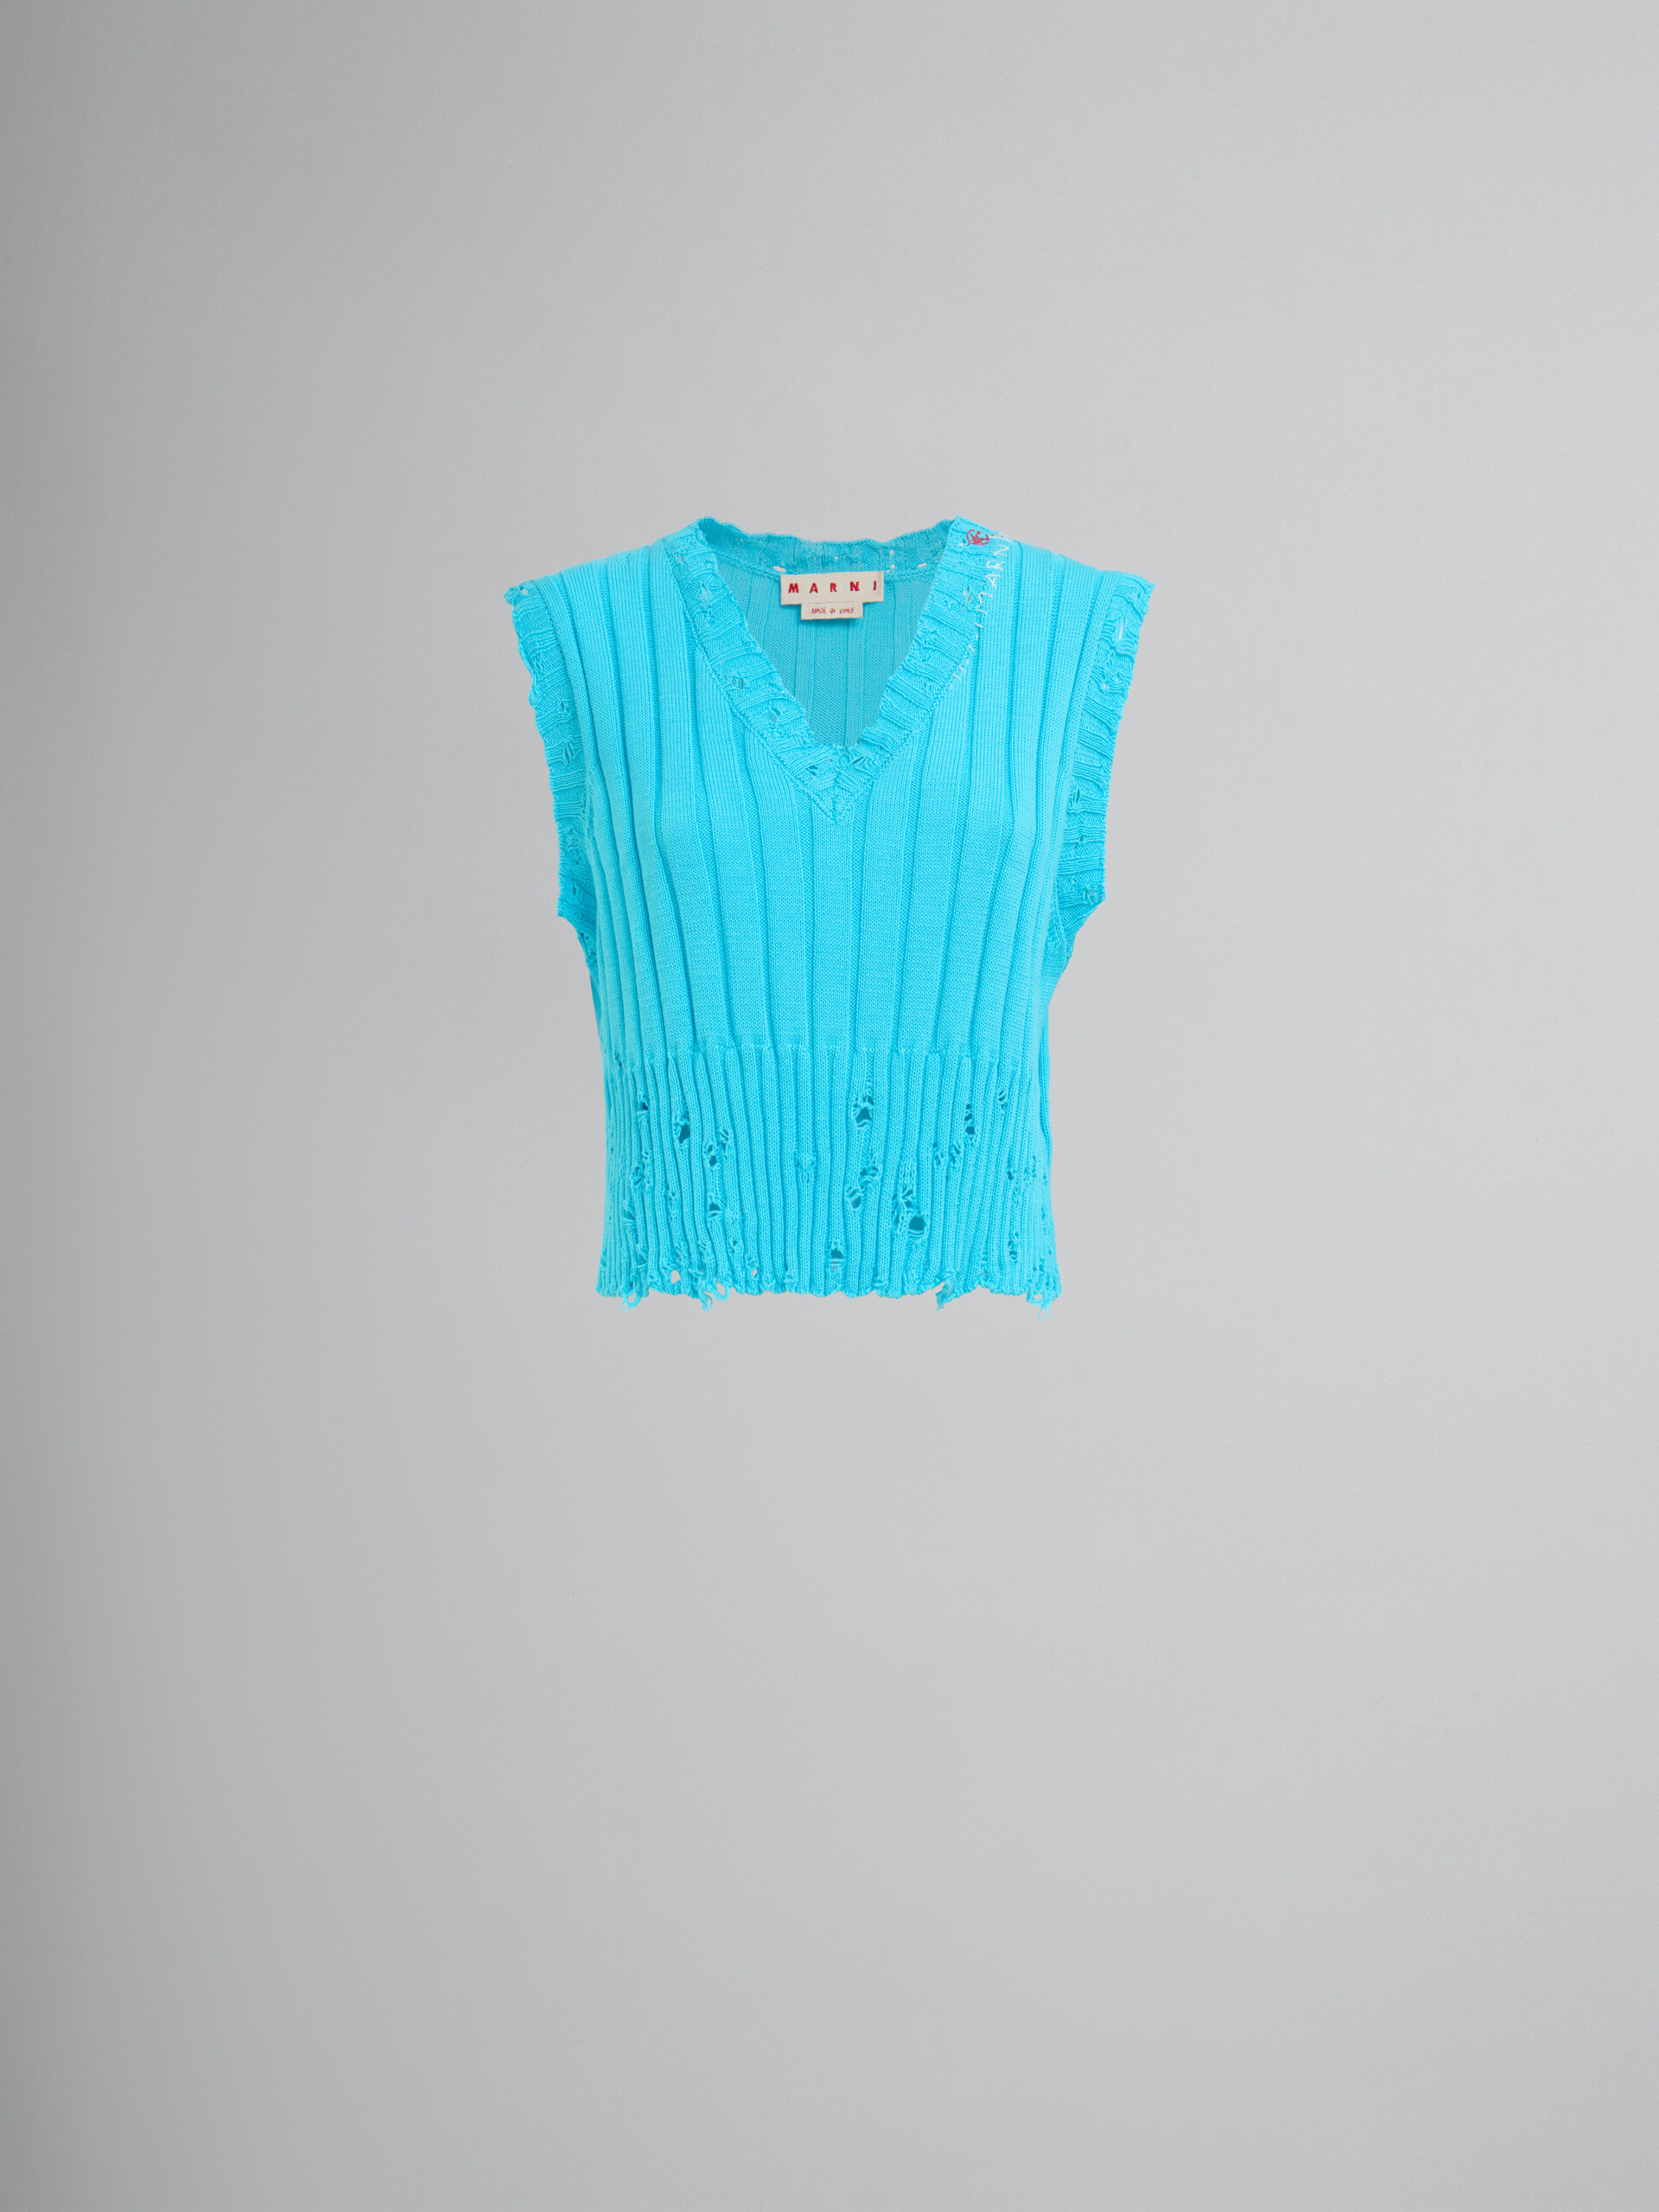 Blue dishevelled ribbed cotton vest - Pullovers - Image 1